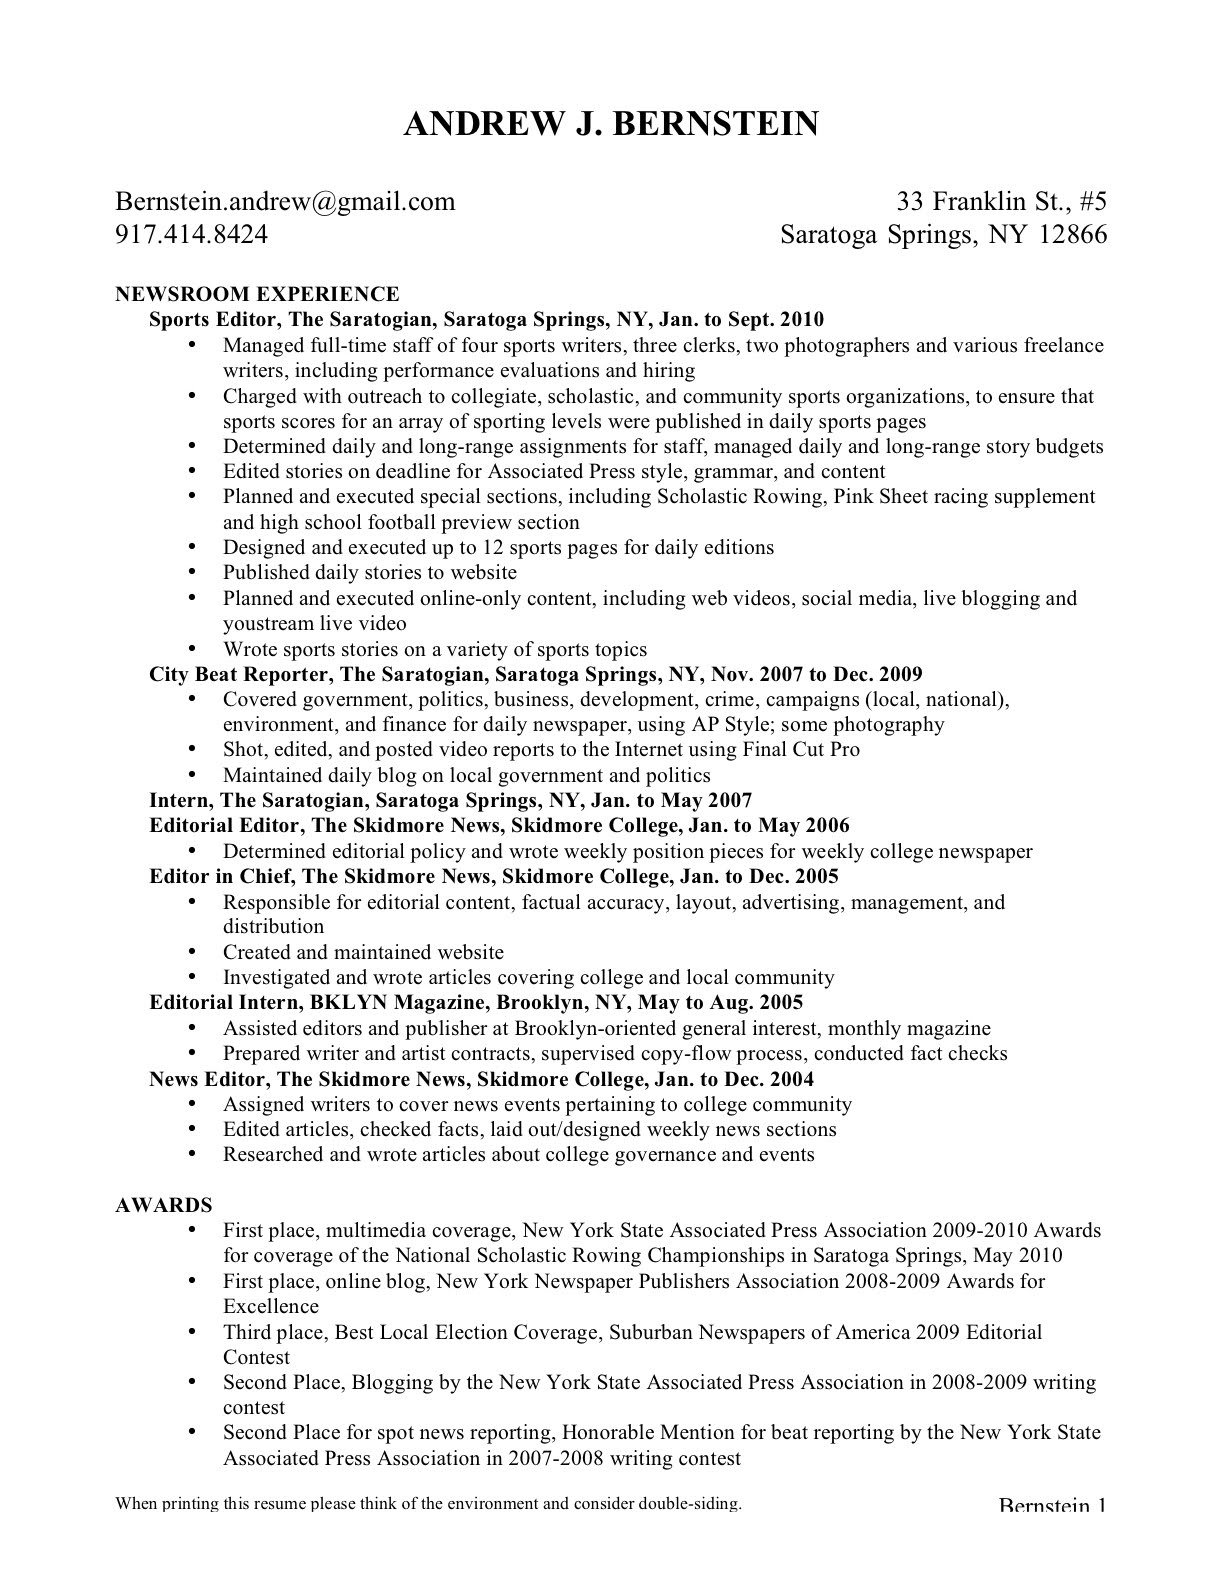 Catchy resume titles